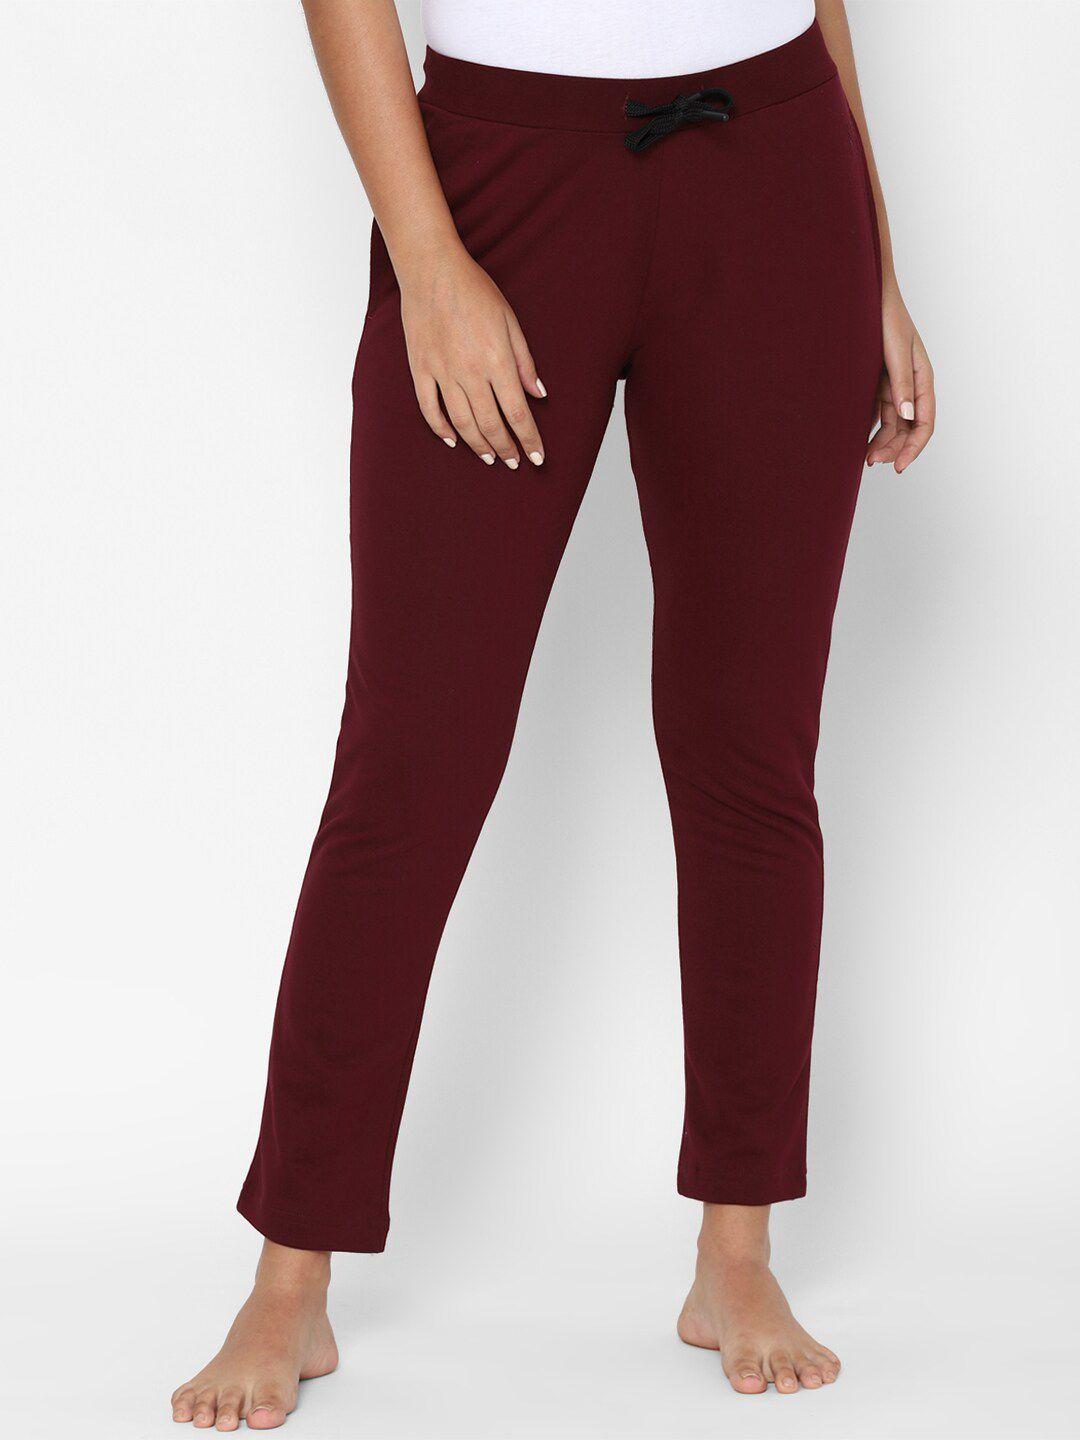 allen solly woman maroon solid pure cotton lounge pants